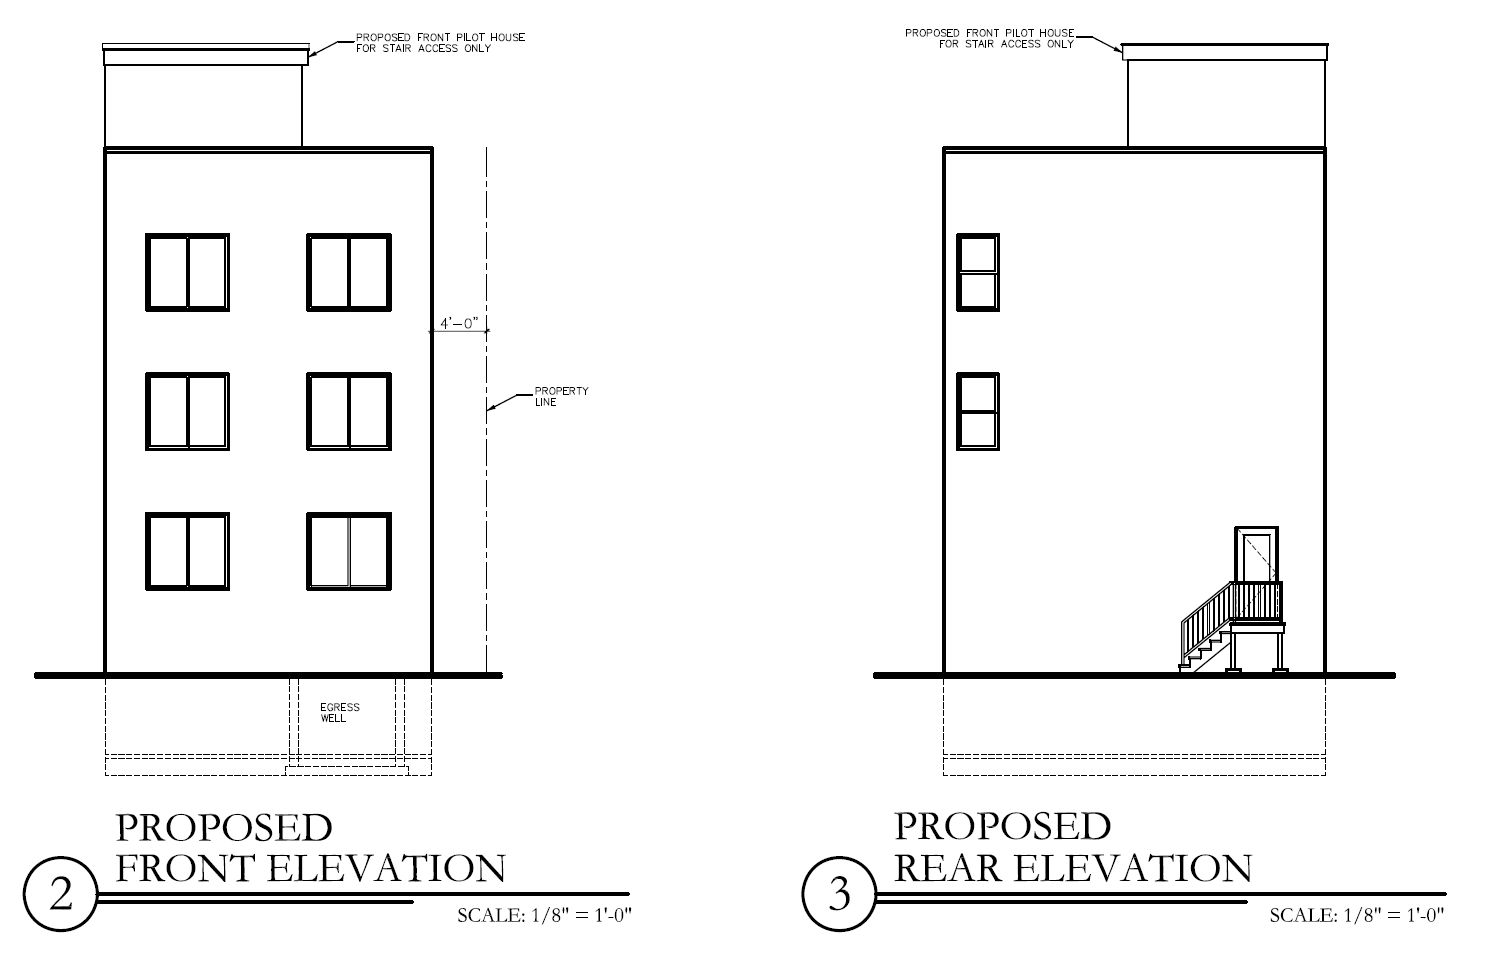 2009 North 22nd Street. Building elevations. Credit: Anthony Maso Architecture & Design via the Department of Planning and Development of the City of Philadelphia